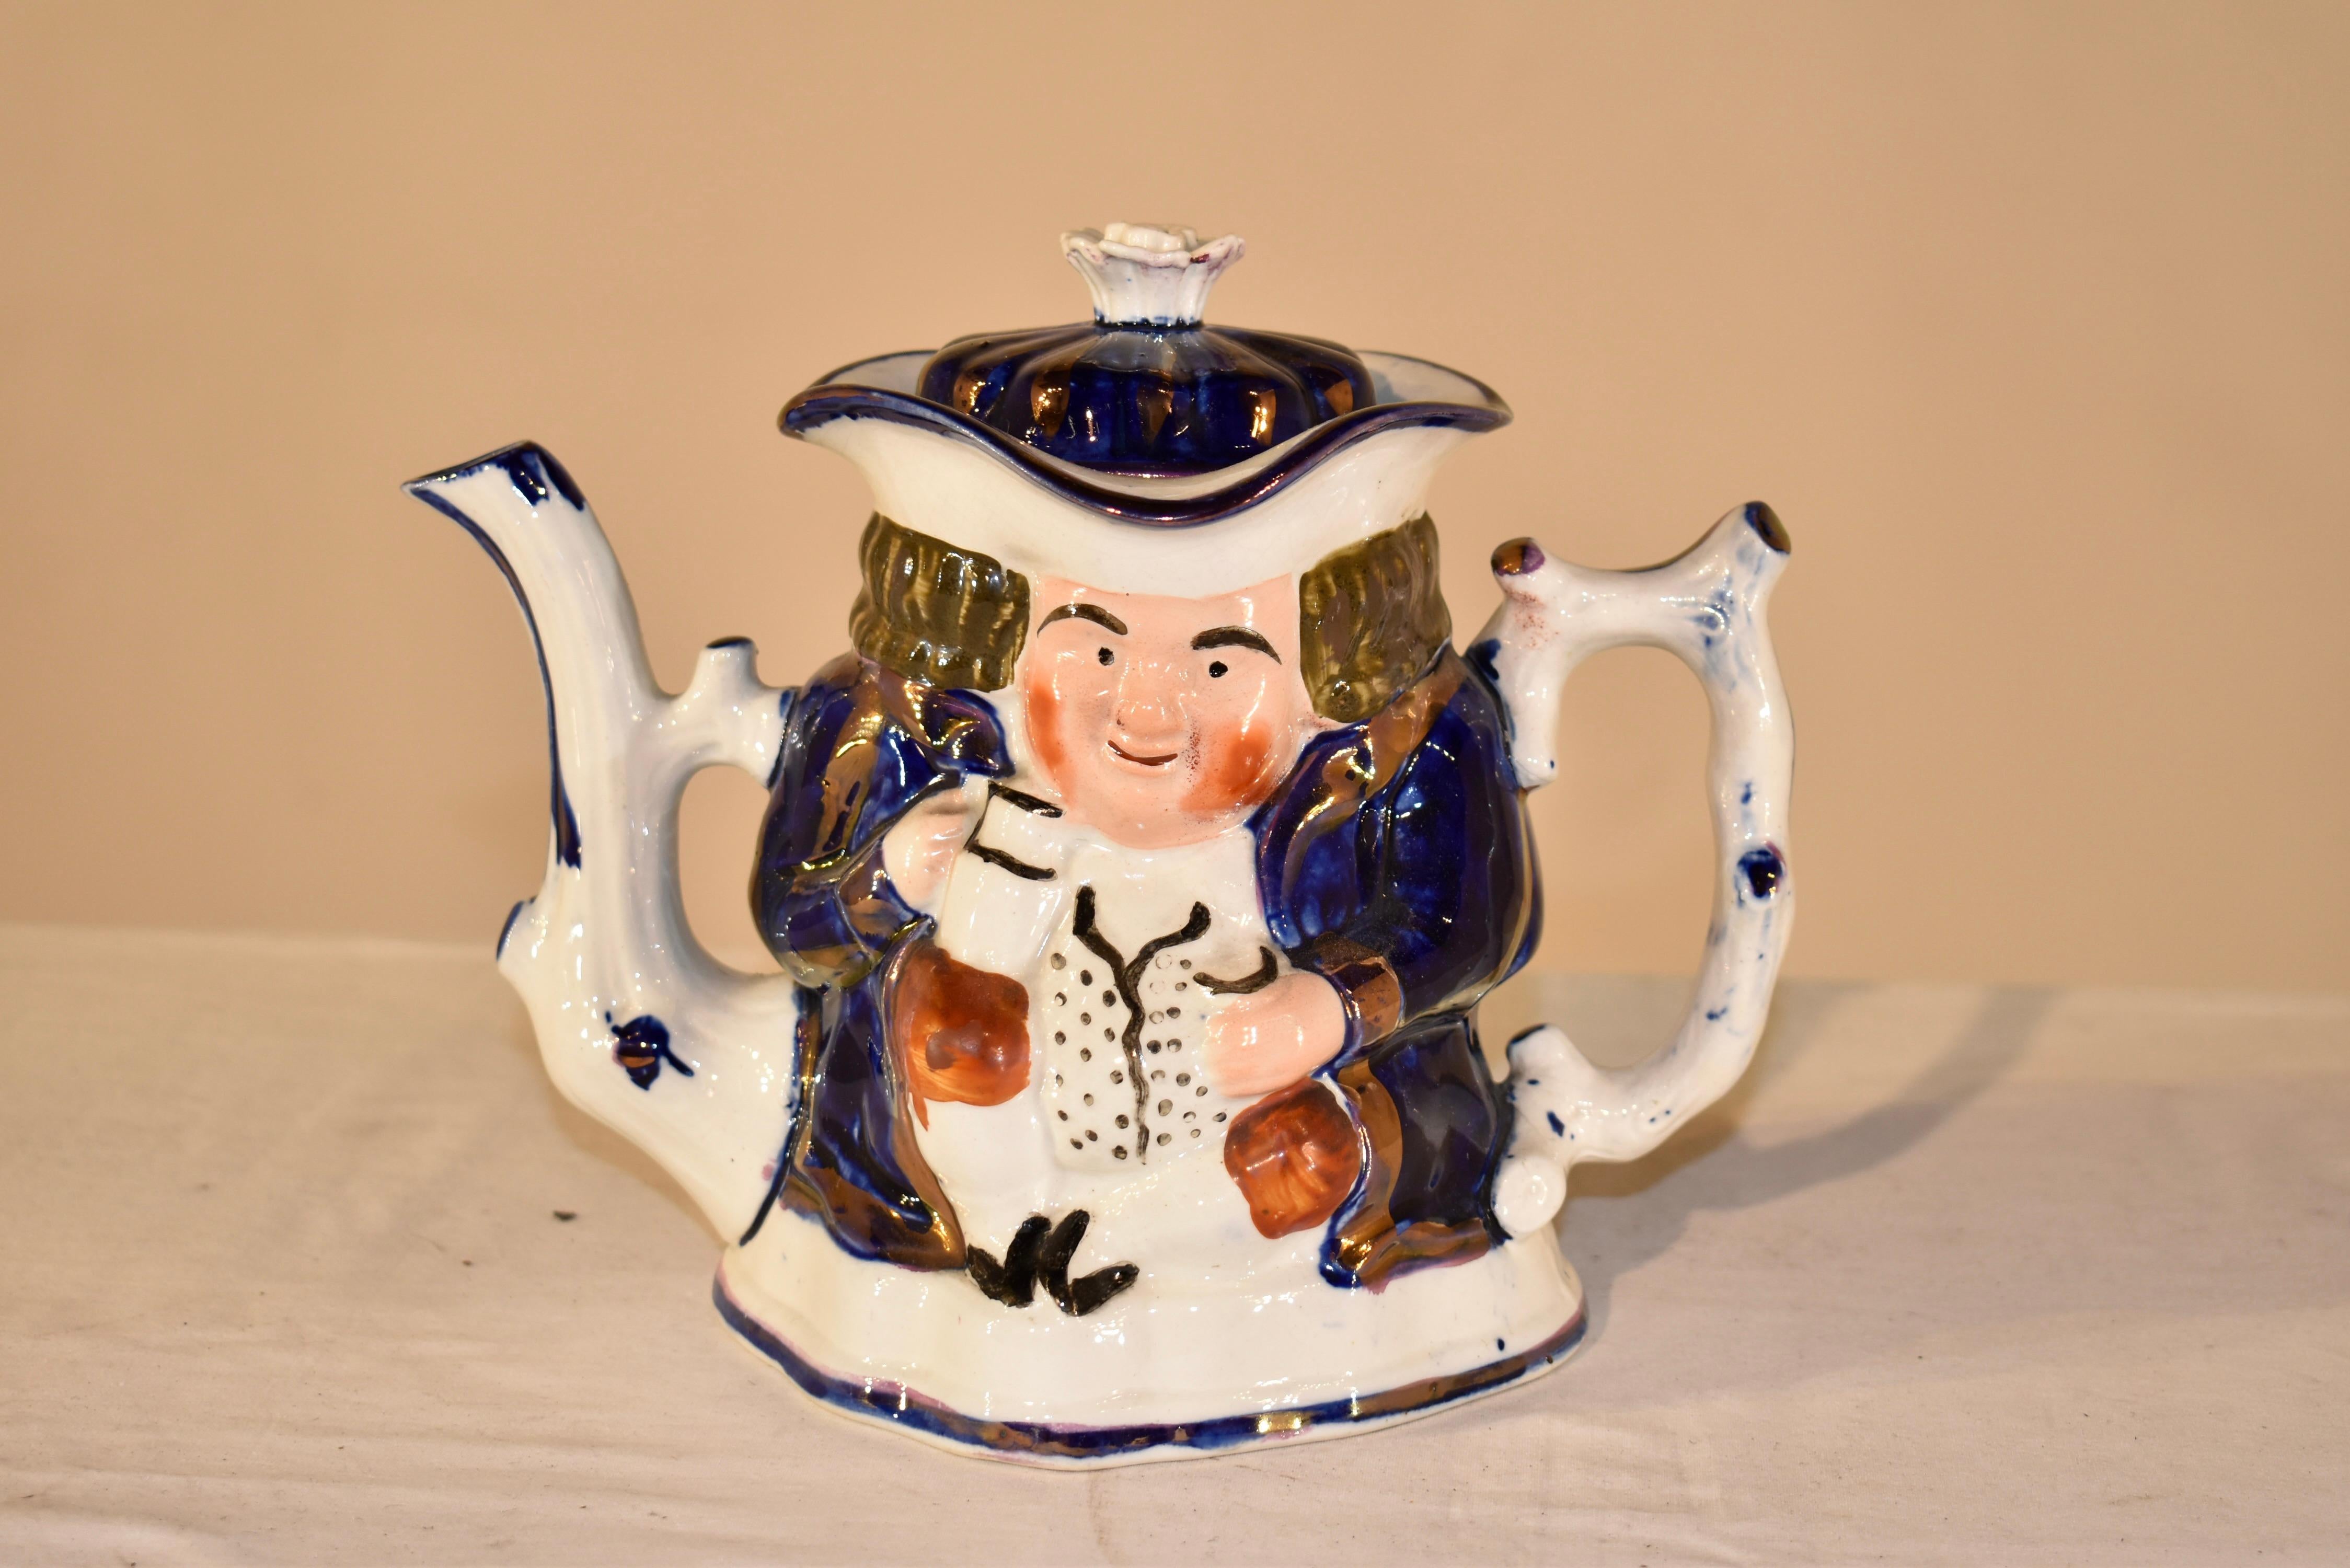 19th century Toby tea pot from the Staffordshire region of England.  The top is in a scalloped shape and is a brilliant cobalt color with copper lustre embellishment.  It is topped with a ceramic top for which to lift the lid.  The tea pot itself is